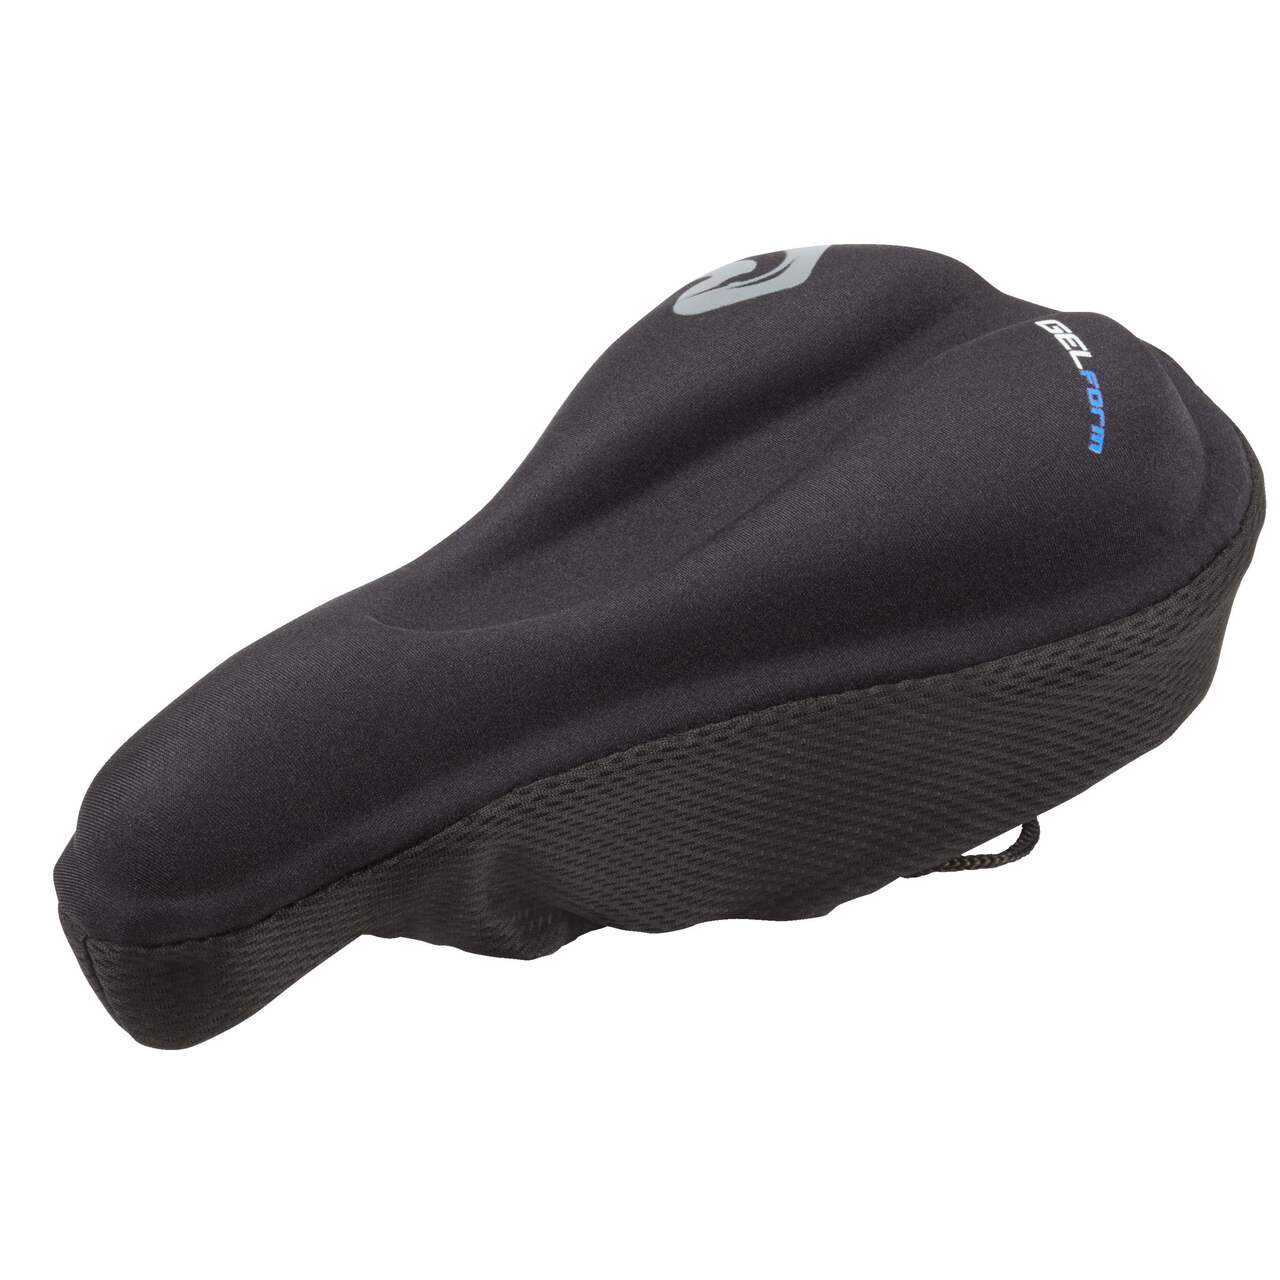 https://media-www.canadiantire.ca/product/playing/cycling/bicycle-accessories/0730587/raleigh-gel-mountain-bike-saddle-cover-efb54889-2acc-497a-8906-1f58f43dfd39-jpgrendition.jpg?imdensity=1&imwidth=640&impolicy=mZoom